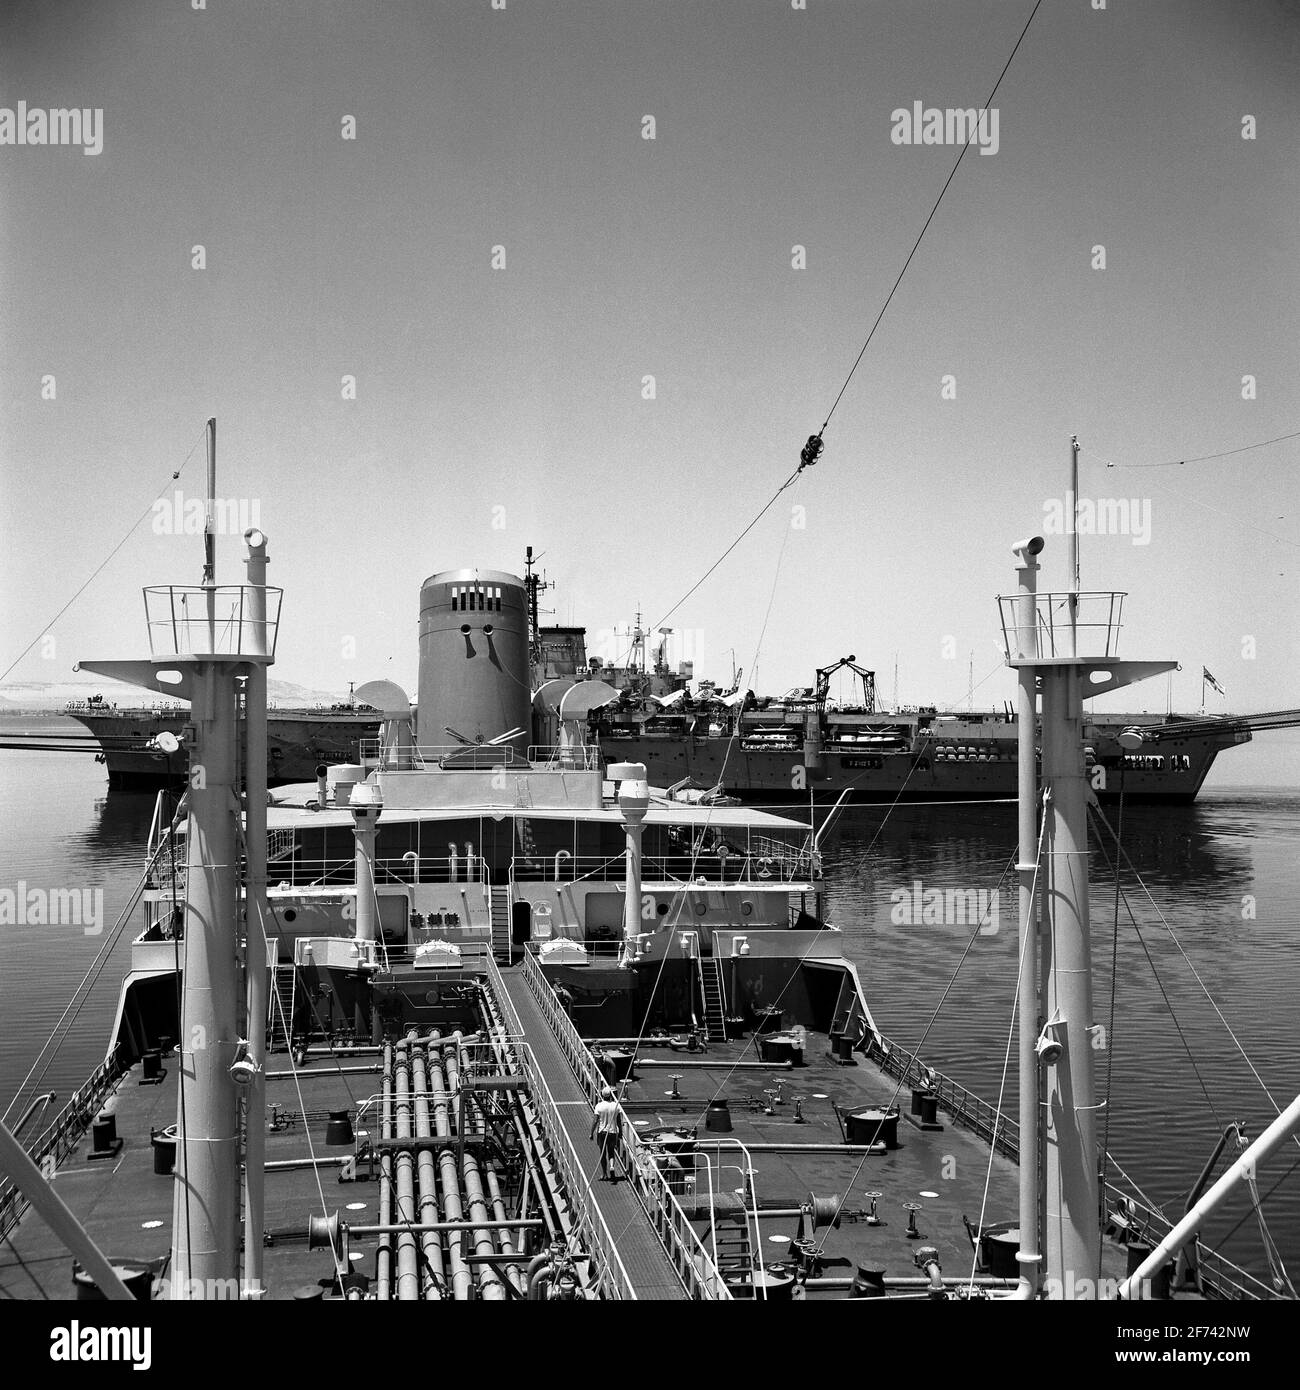 AJAXNETPHOTO. 1965. GREAT BITTER LAKE, EGYPT - ARK EAST OF SUEZ - HMS ARK ROYAL PASSING THROUGH THE GREAT BITTER LAKE OF THE SUEZ CANAL ON PASSAGE TO THE FAR EAST ASTERN OF THE GULF OIL TANKER CEUTA AWAITING PASSAGE NORTHBOUND.  PHOTO:JONATHAN EASTLAND/AJAX REF:657 13 2 Stock Photo